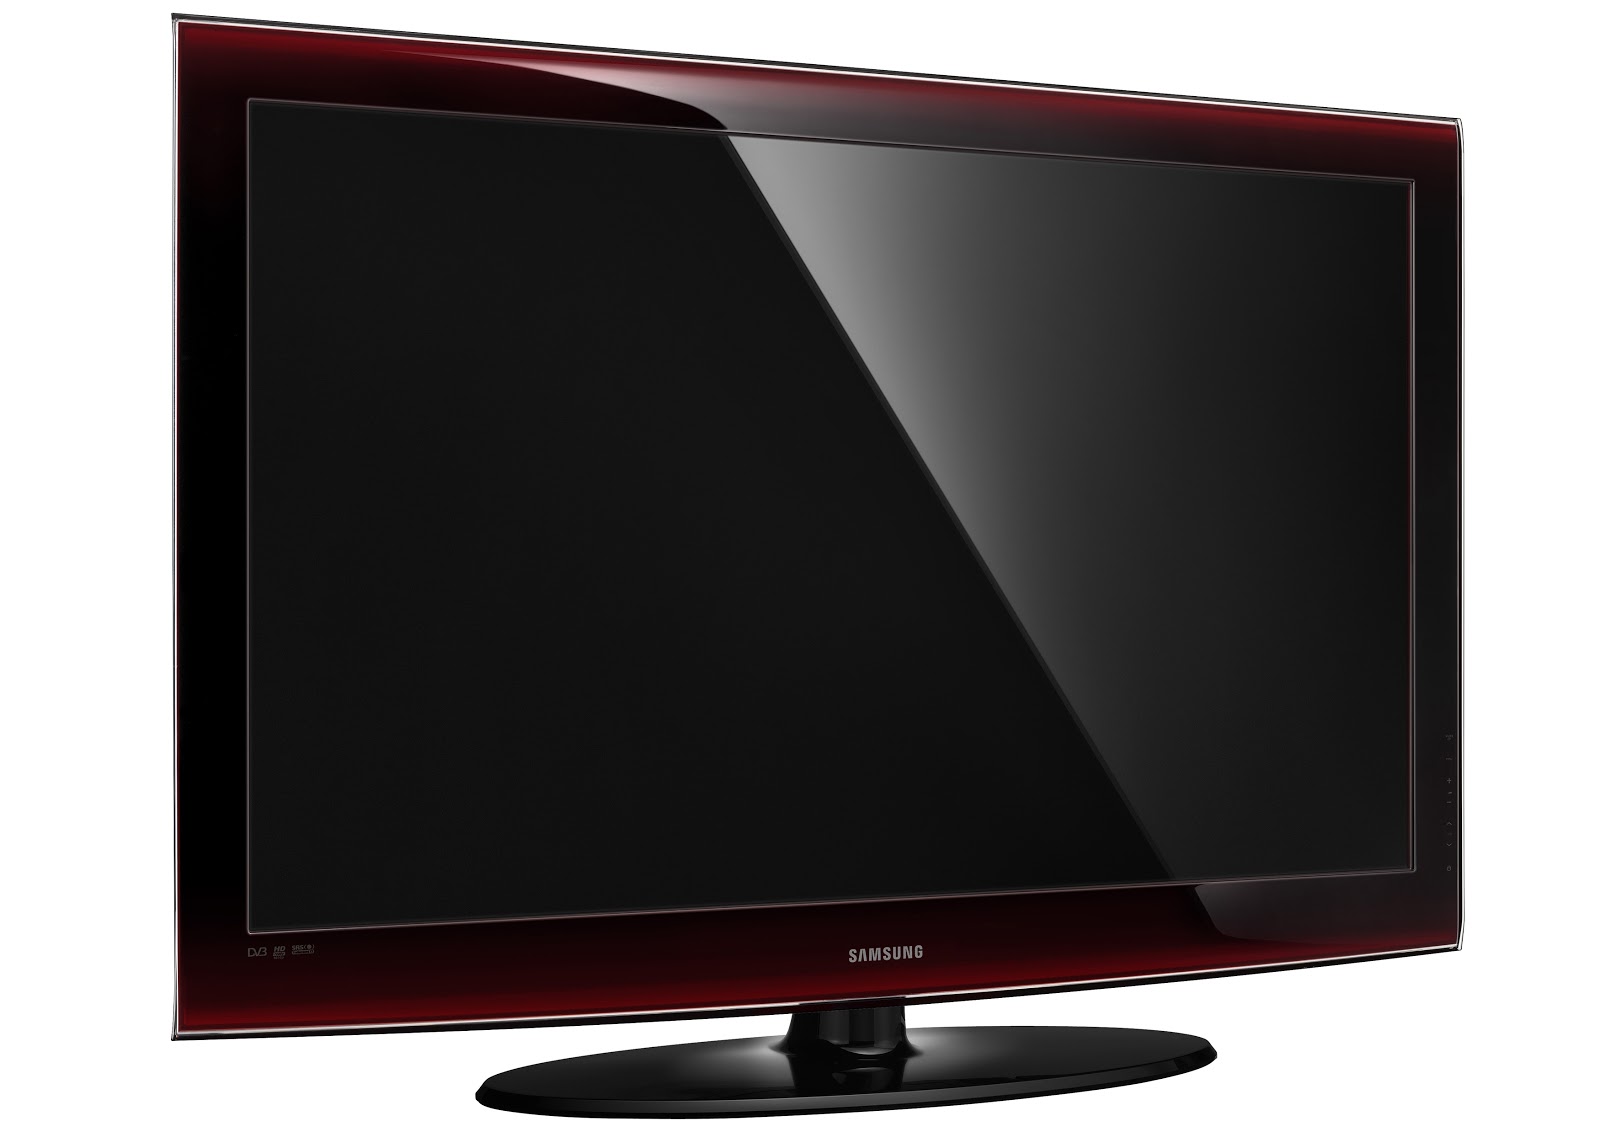 Stylish Samsung Lcd HD Tv Pictures